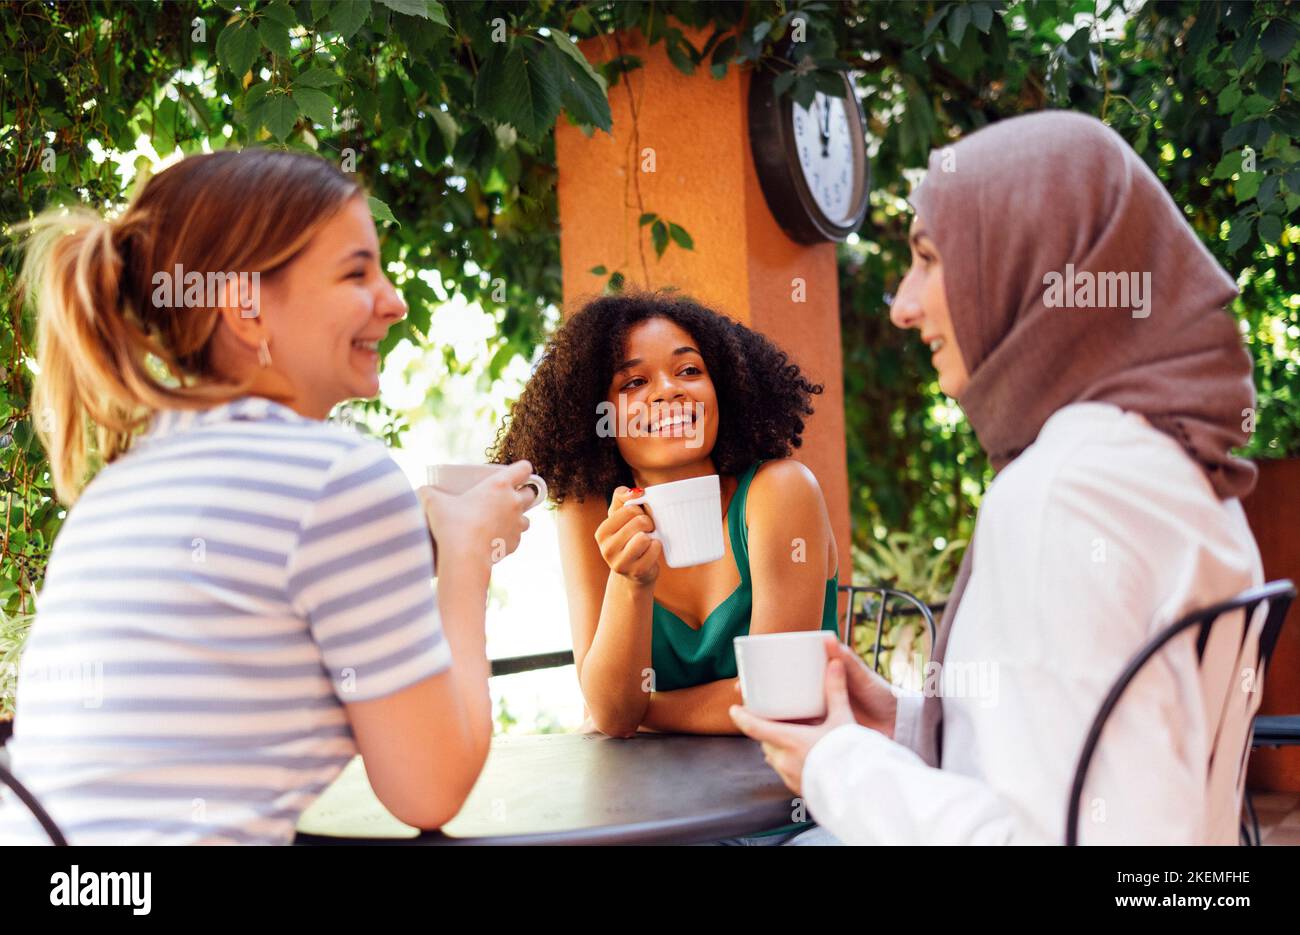 Multiethnic group of girls wearing casual clothes and traditional hijab bonding and having fun outdoors. Three young teen girls in garden cafe drinkin Stock Photo